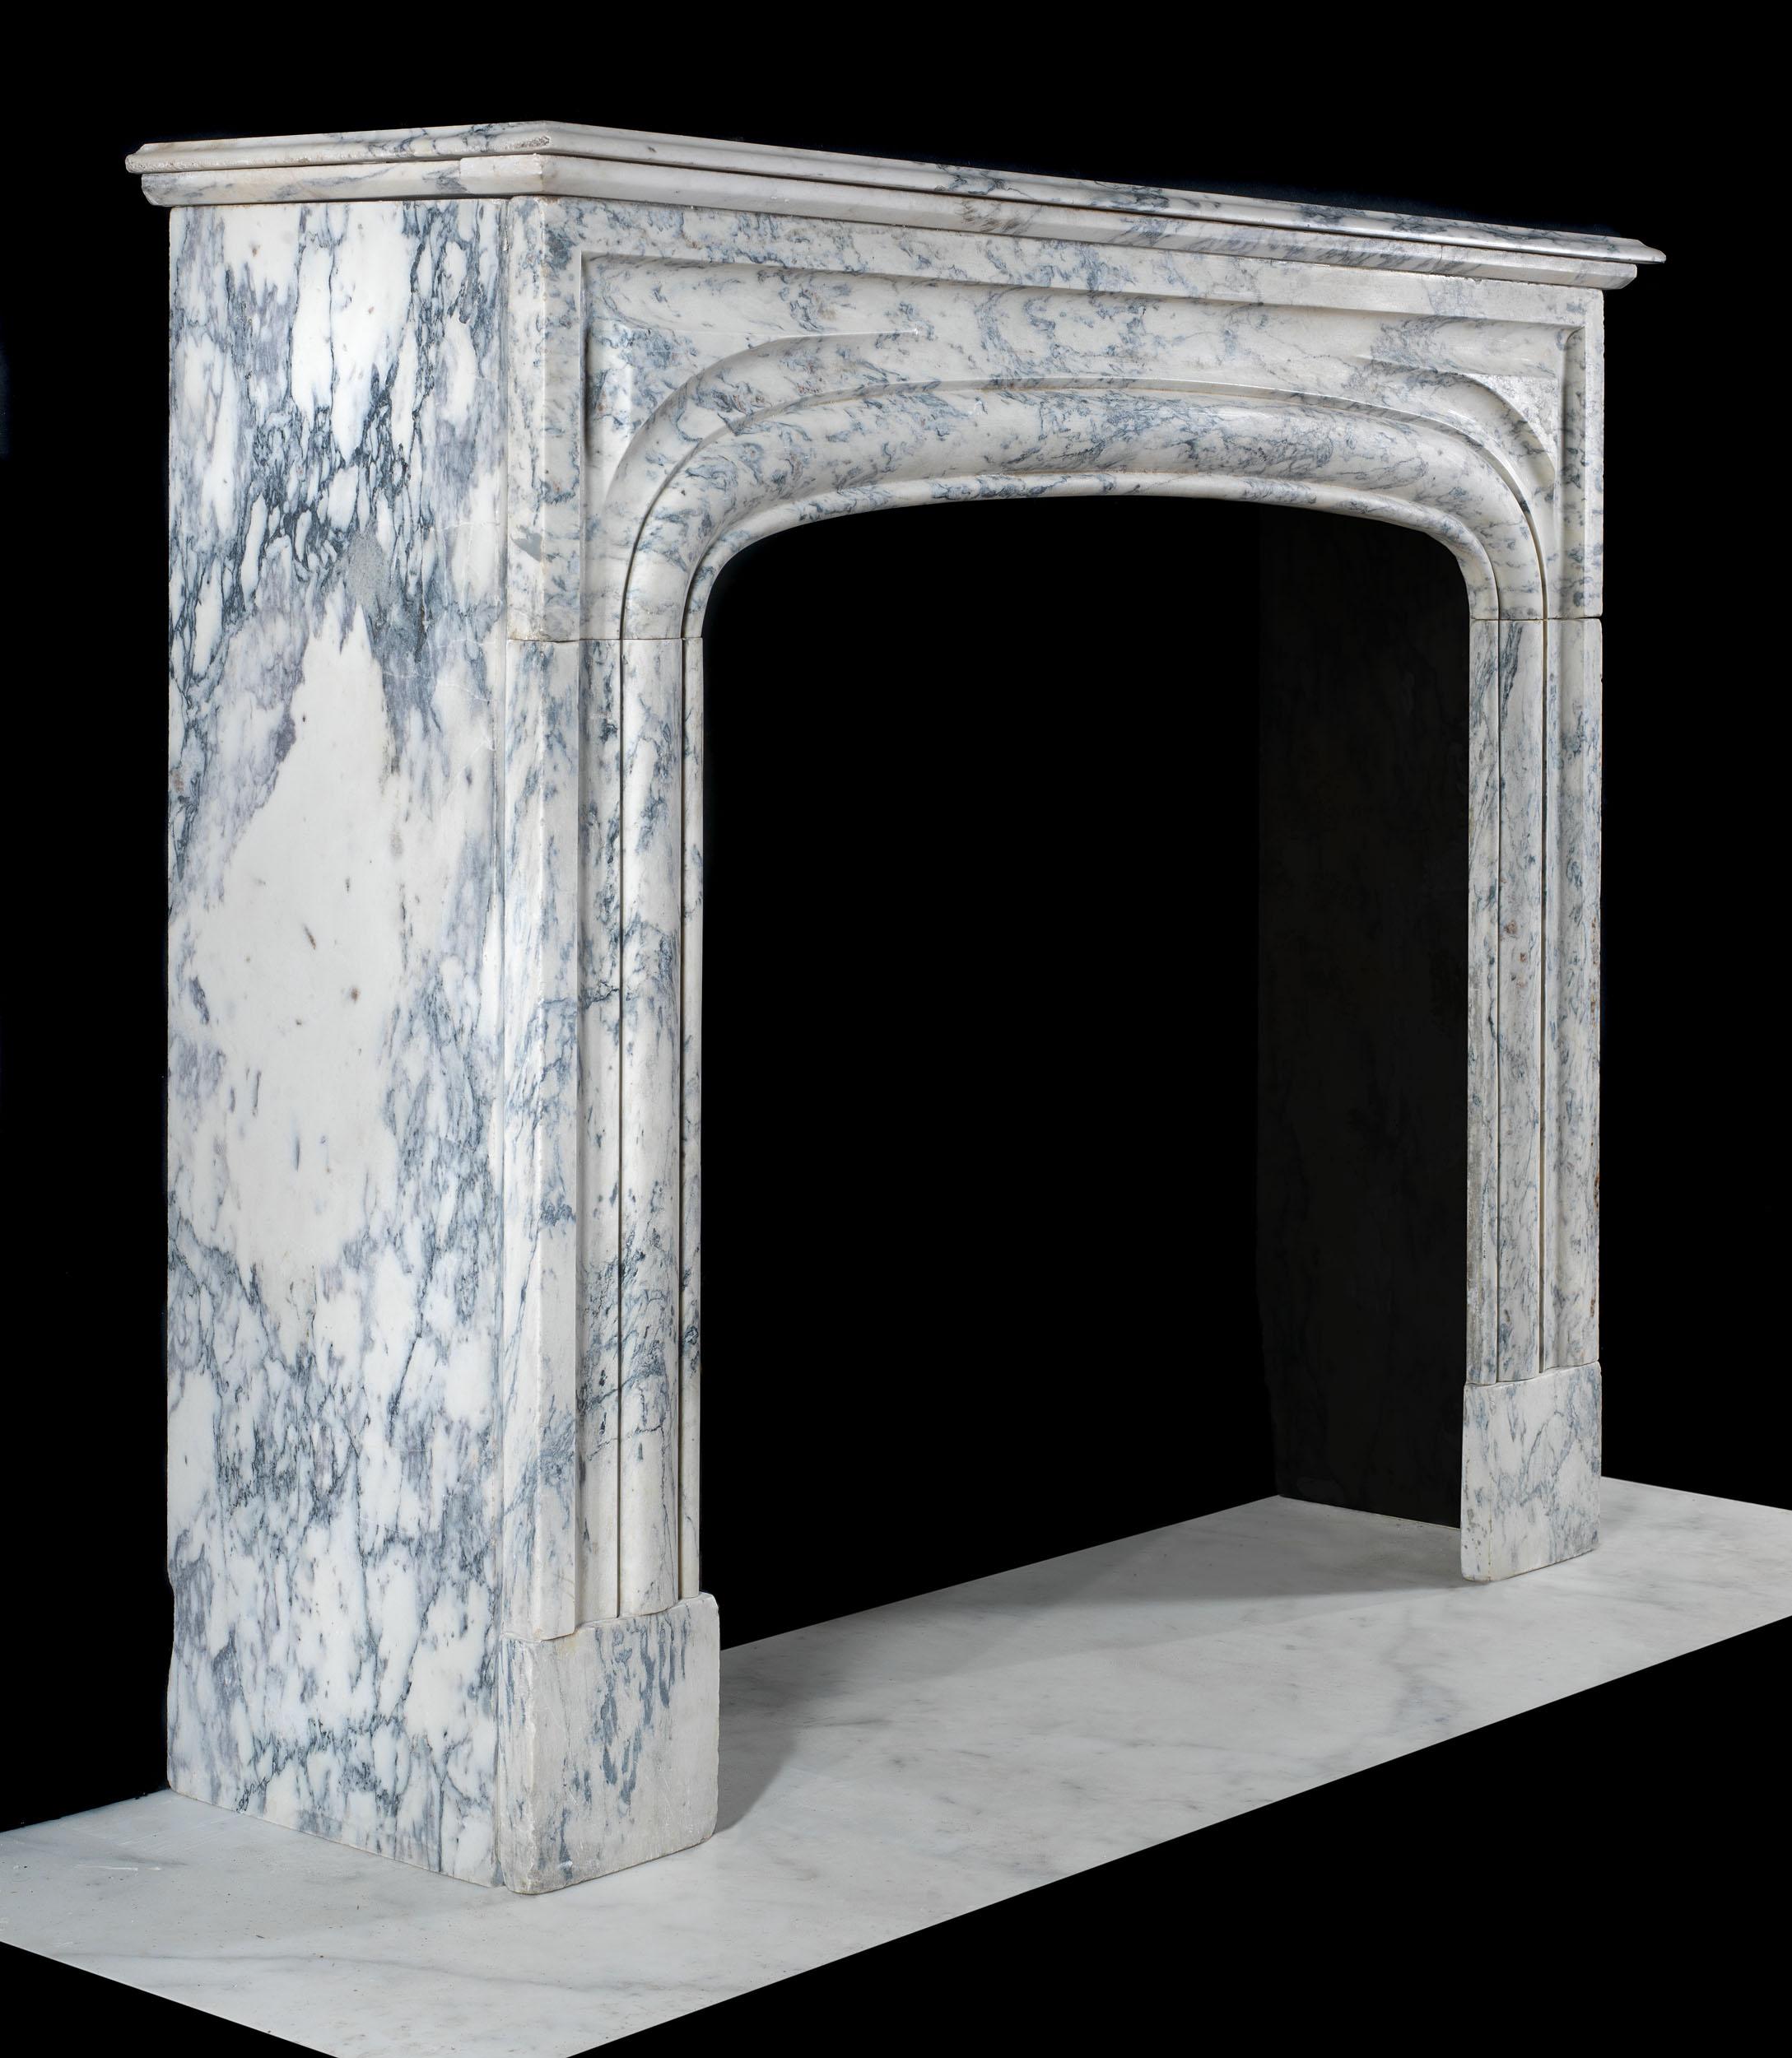 A delicately veined blue/grey and white Breccia Marble antique chimneypiece in the French Empire style with a slow arched opening and deep side returns. French, circa 1860.
   